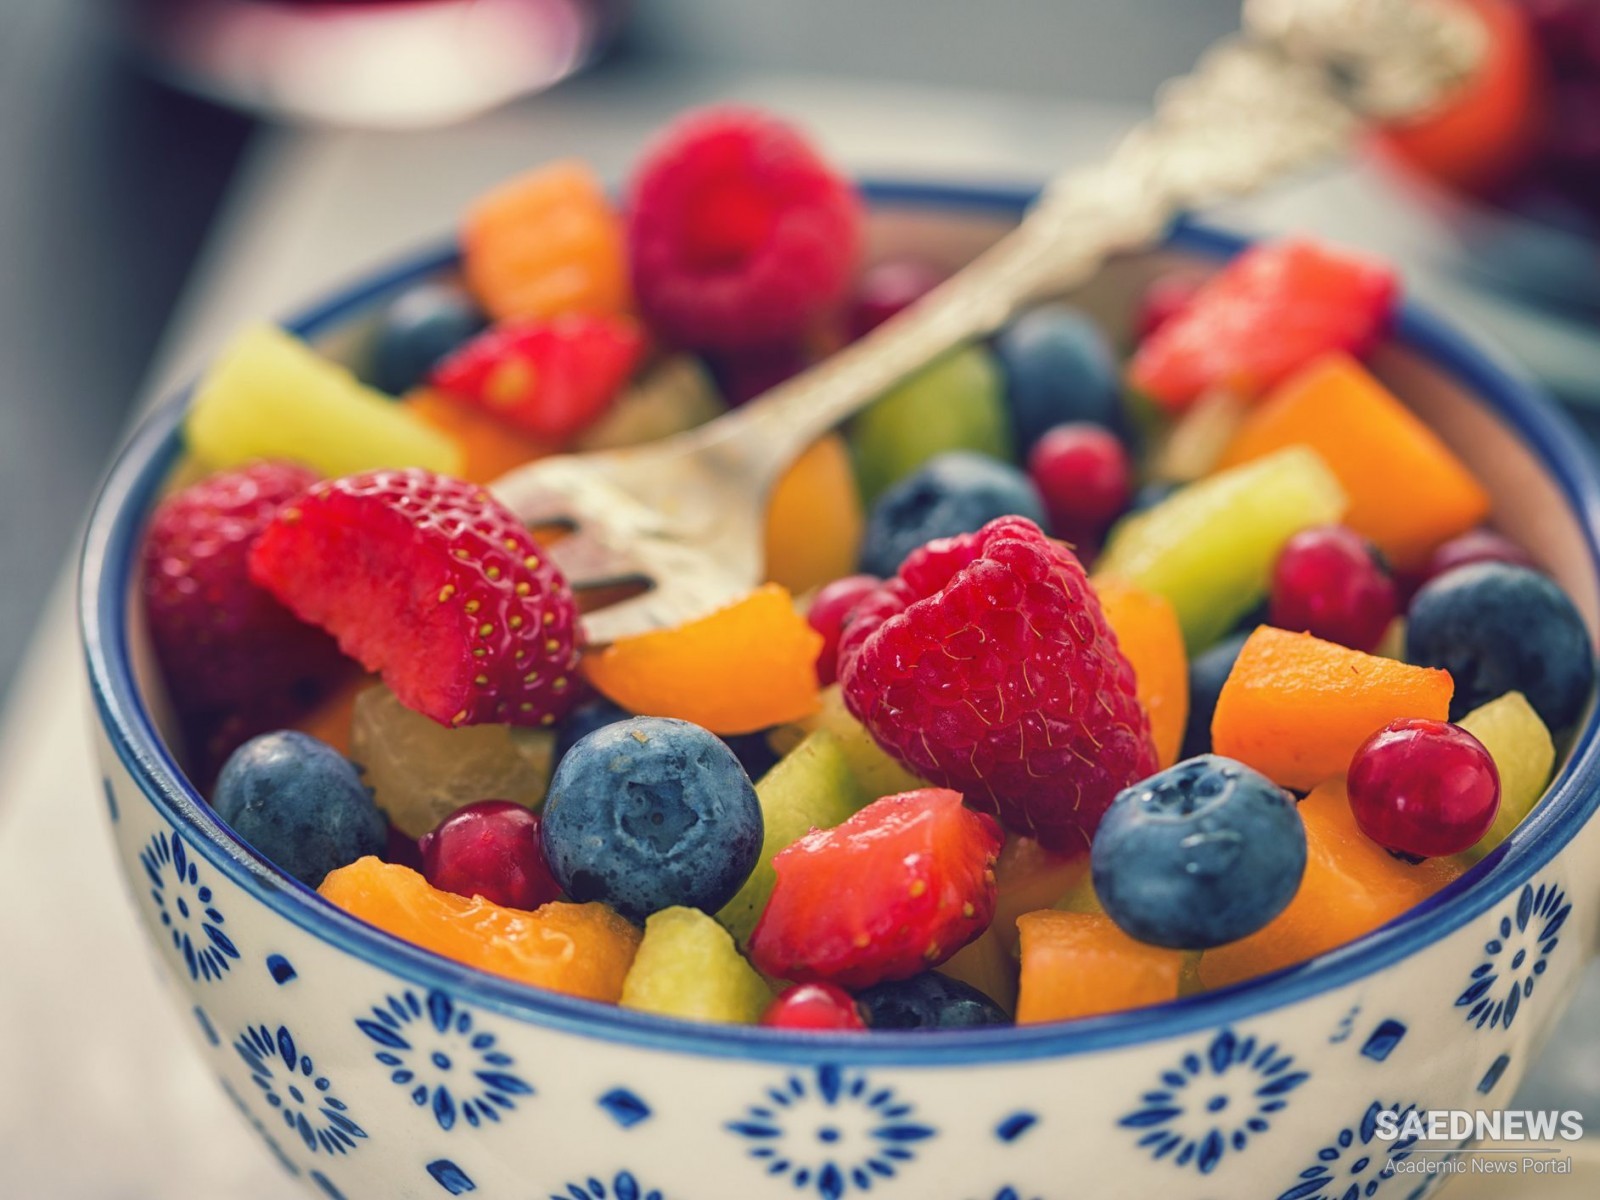 Fast Fruit Salad: You Are in a Hurry?